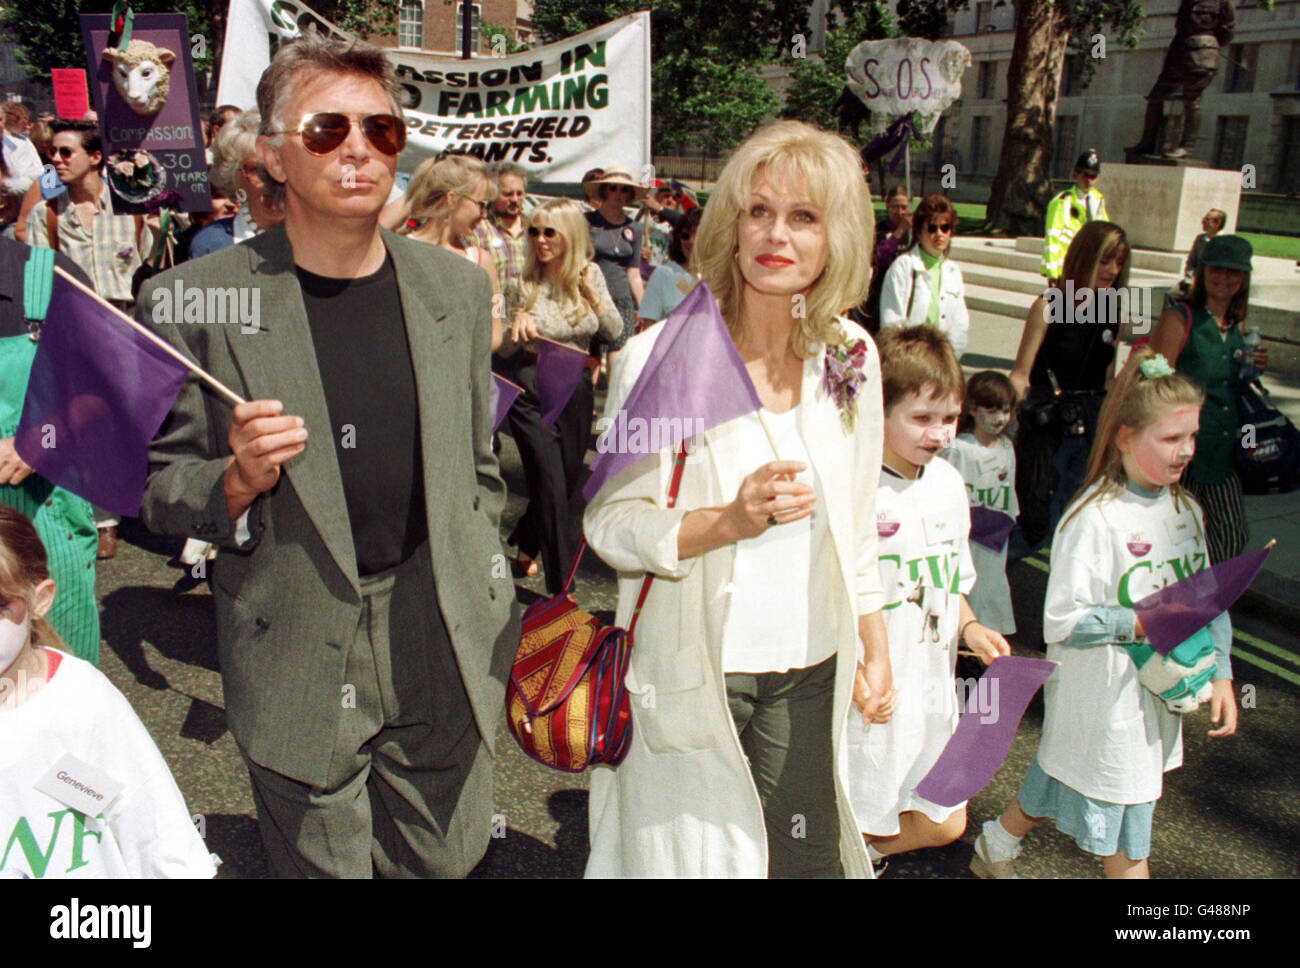 Actor Martin Shaw and actress Joanna Lumley during a demonstration to highlight the suffering of some animals in the world of international agriculture. The demonstration marked the 30th anniversary of 'Compassion in World Farming'. 22/08/97: Martin Shaw, is considering taking legal action against a bus driver he claims assaulted him in a road rage style attack. Mr Shaw, who played Doyle in The Professionals has a three-inch gash under his chin and is seeing an osteopath today for treatment for bruised ribs. Stock Photo